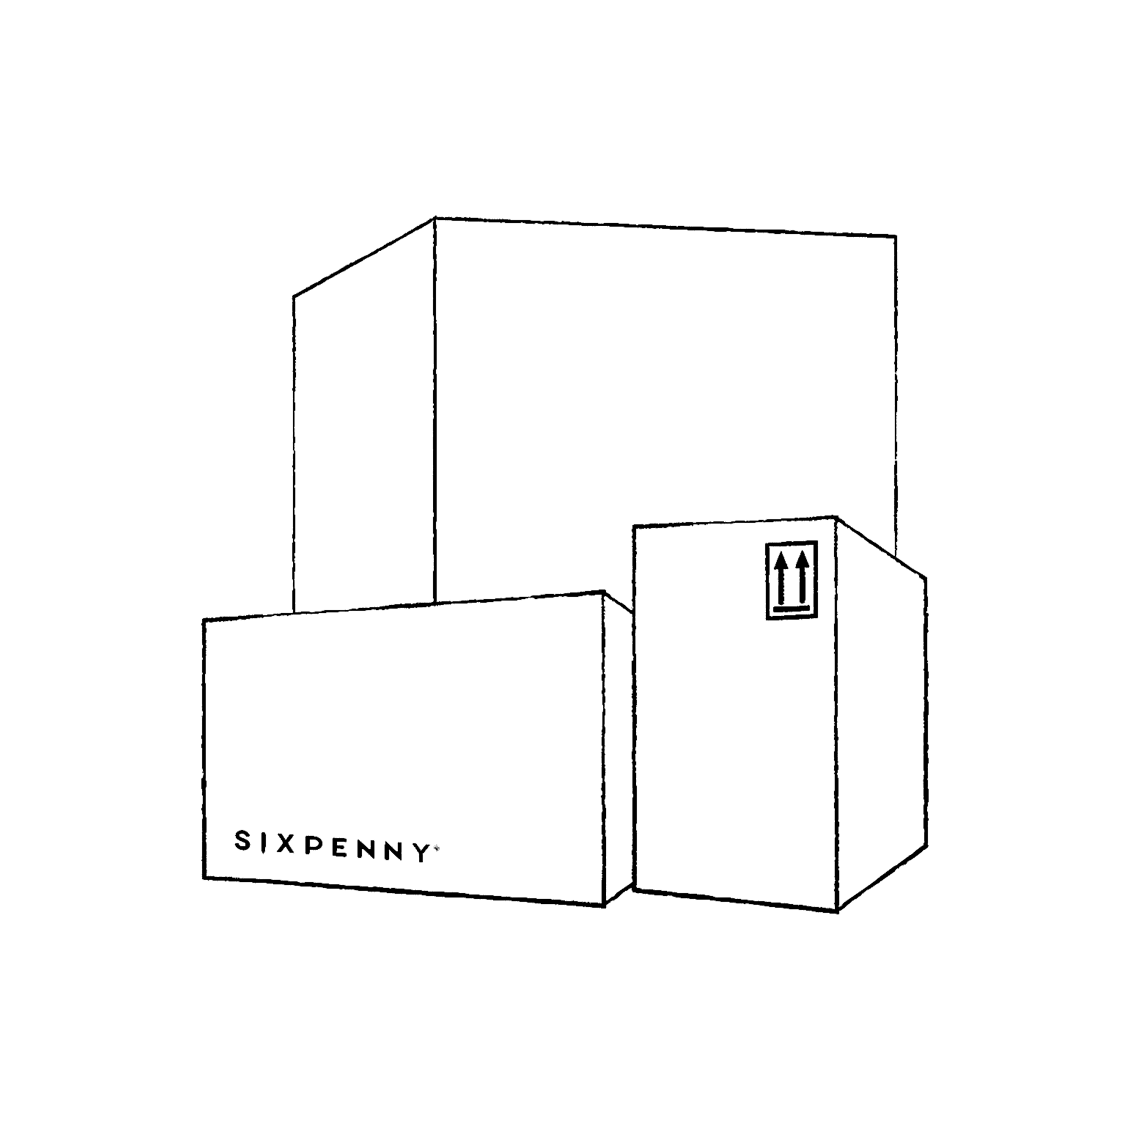 Illustration of 3 branded Sixpenny boxes